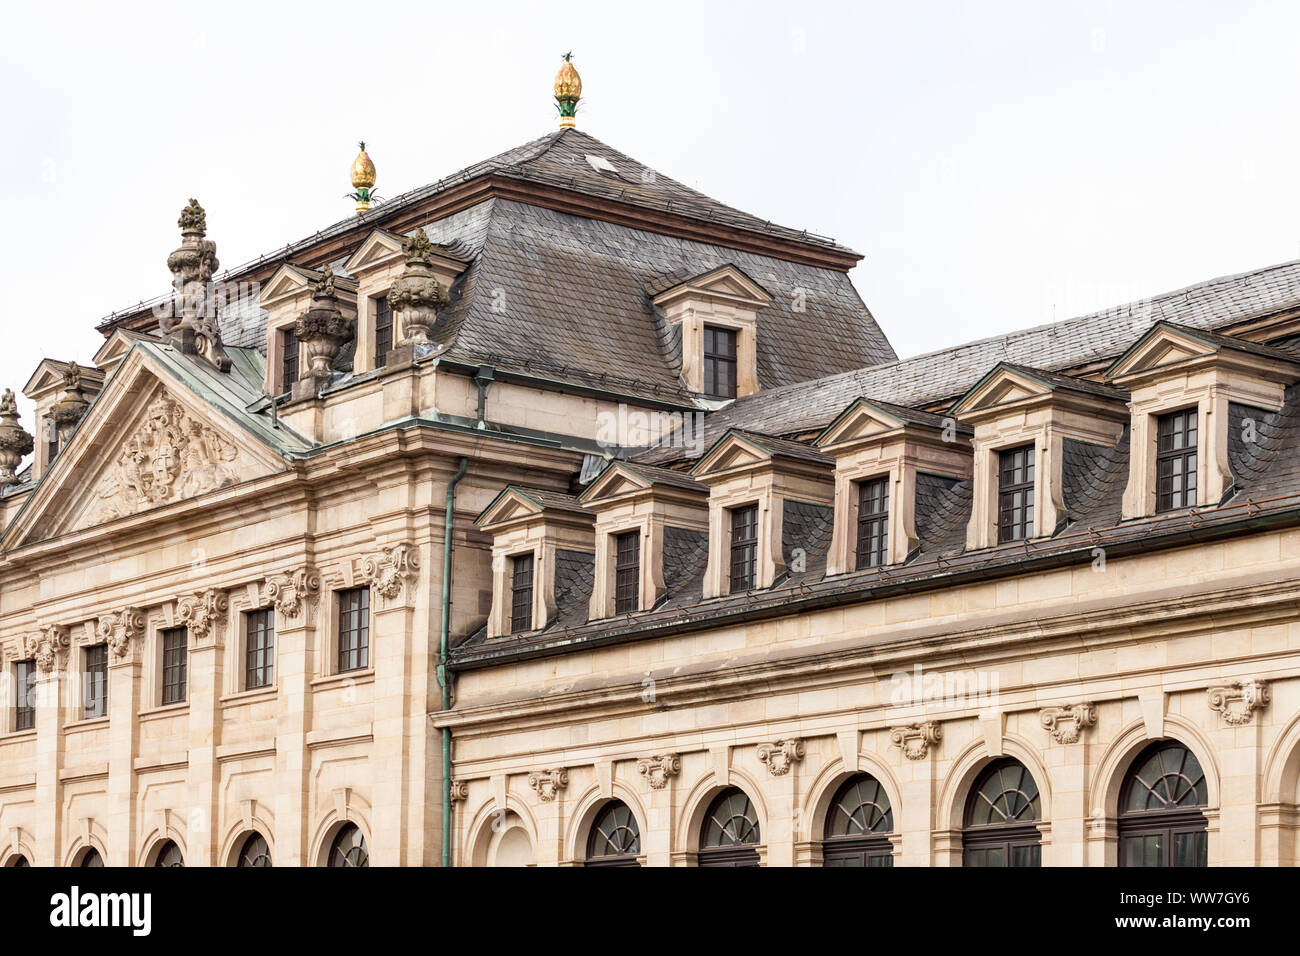 Artful ornaments on the roof of the castle in Fulda, Hesse, Germany Stock Photo